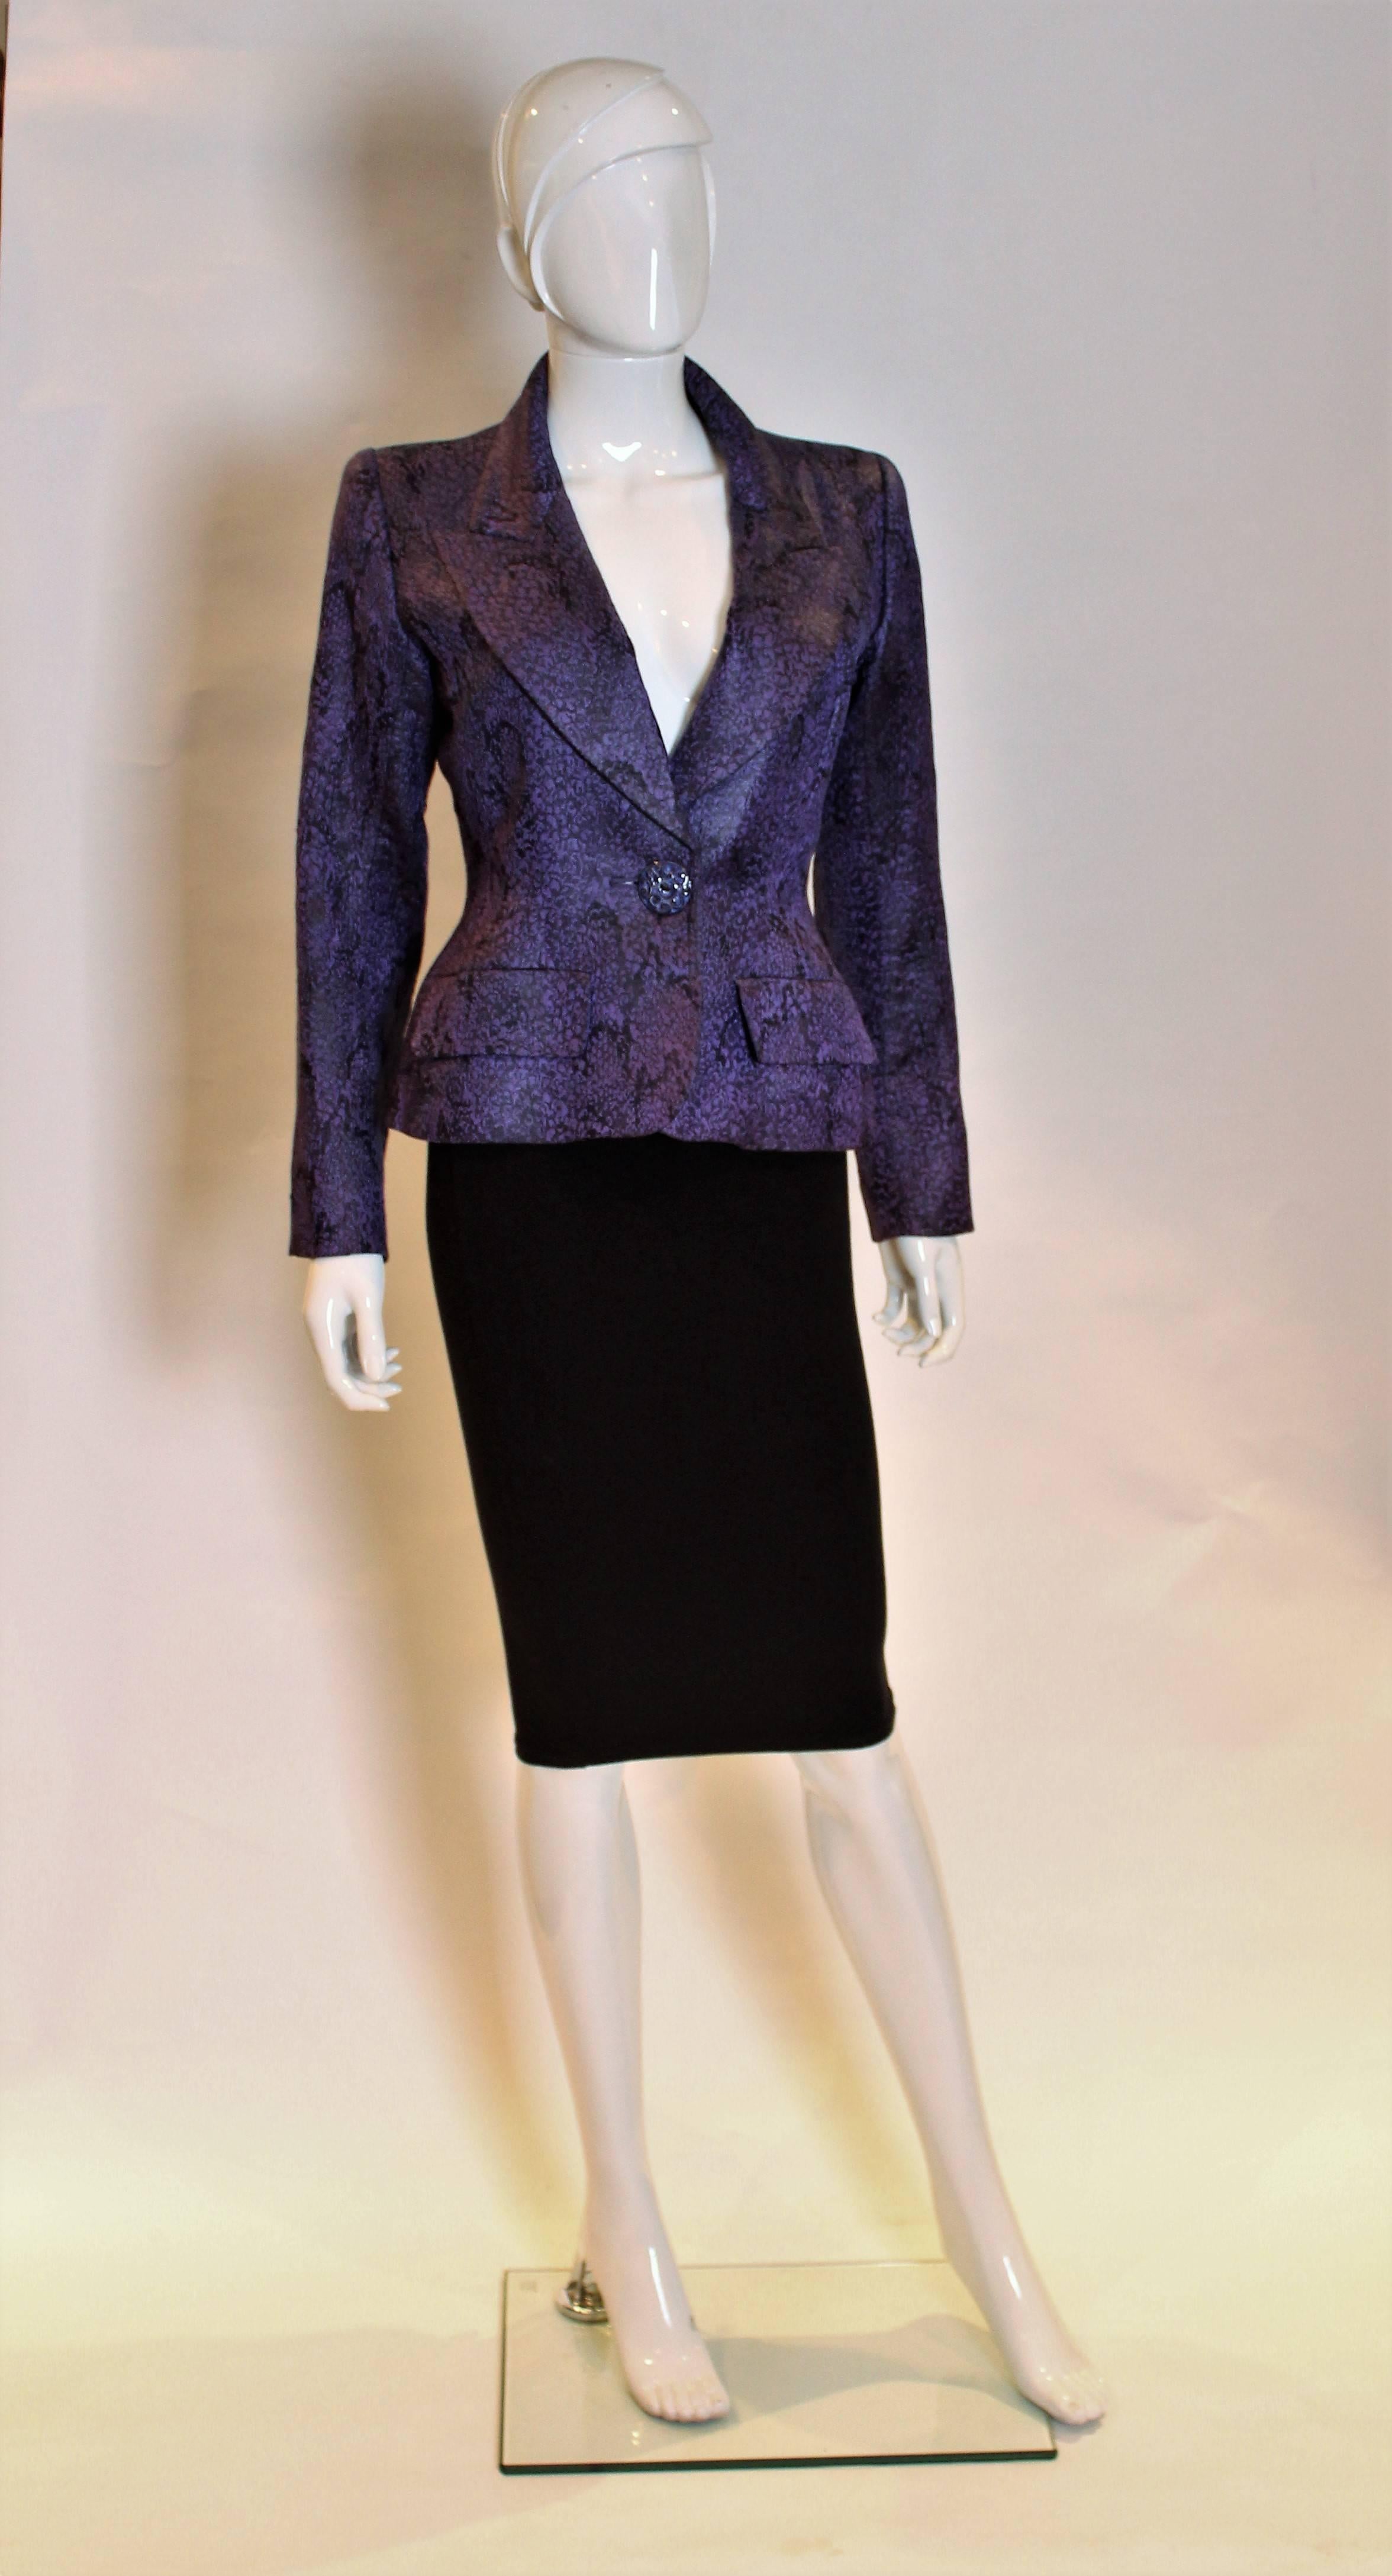 A stunning jacket by Yves Saint Laurent , Rive Gauche line. This jacket has wonderful tailoring and the fabric  is lilac and black in colour with a slightly metallic sheen.It has a one button fastening.